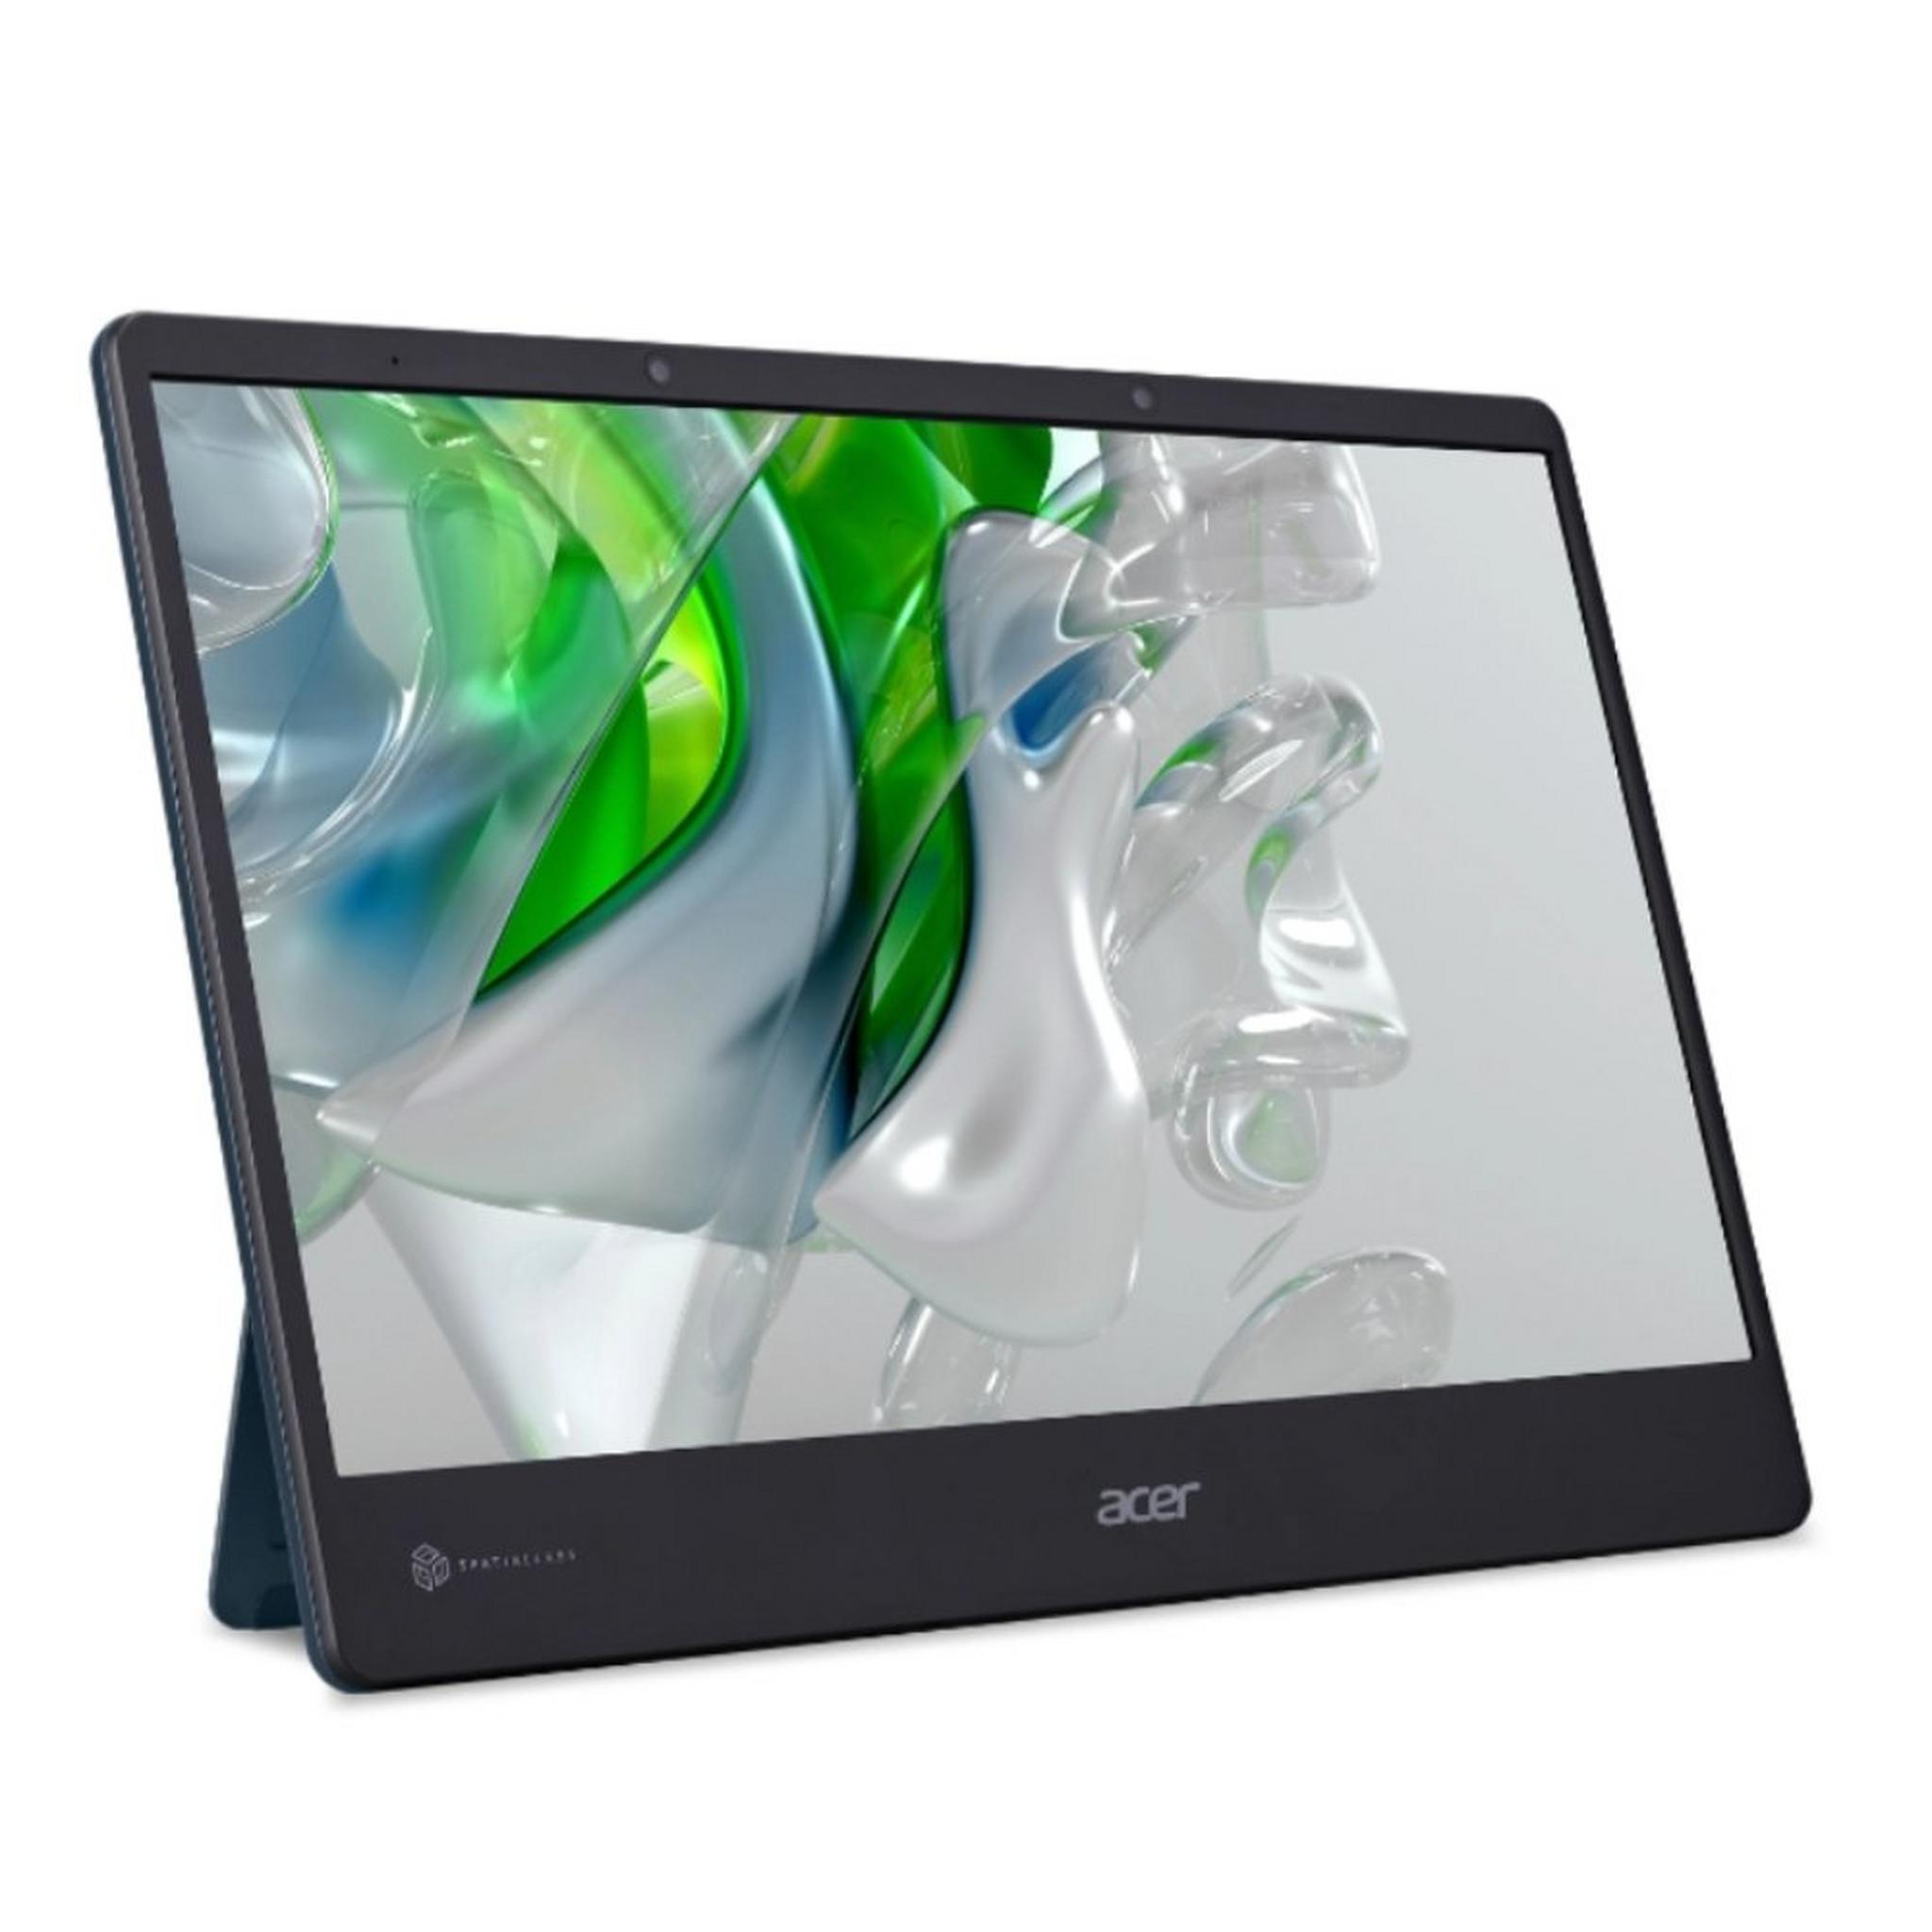 Acer Nitro SpatialLabs View 15.6-inch UHD 3D Display (FF.R1WEK.001)